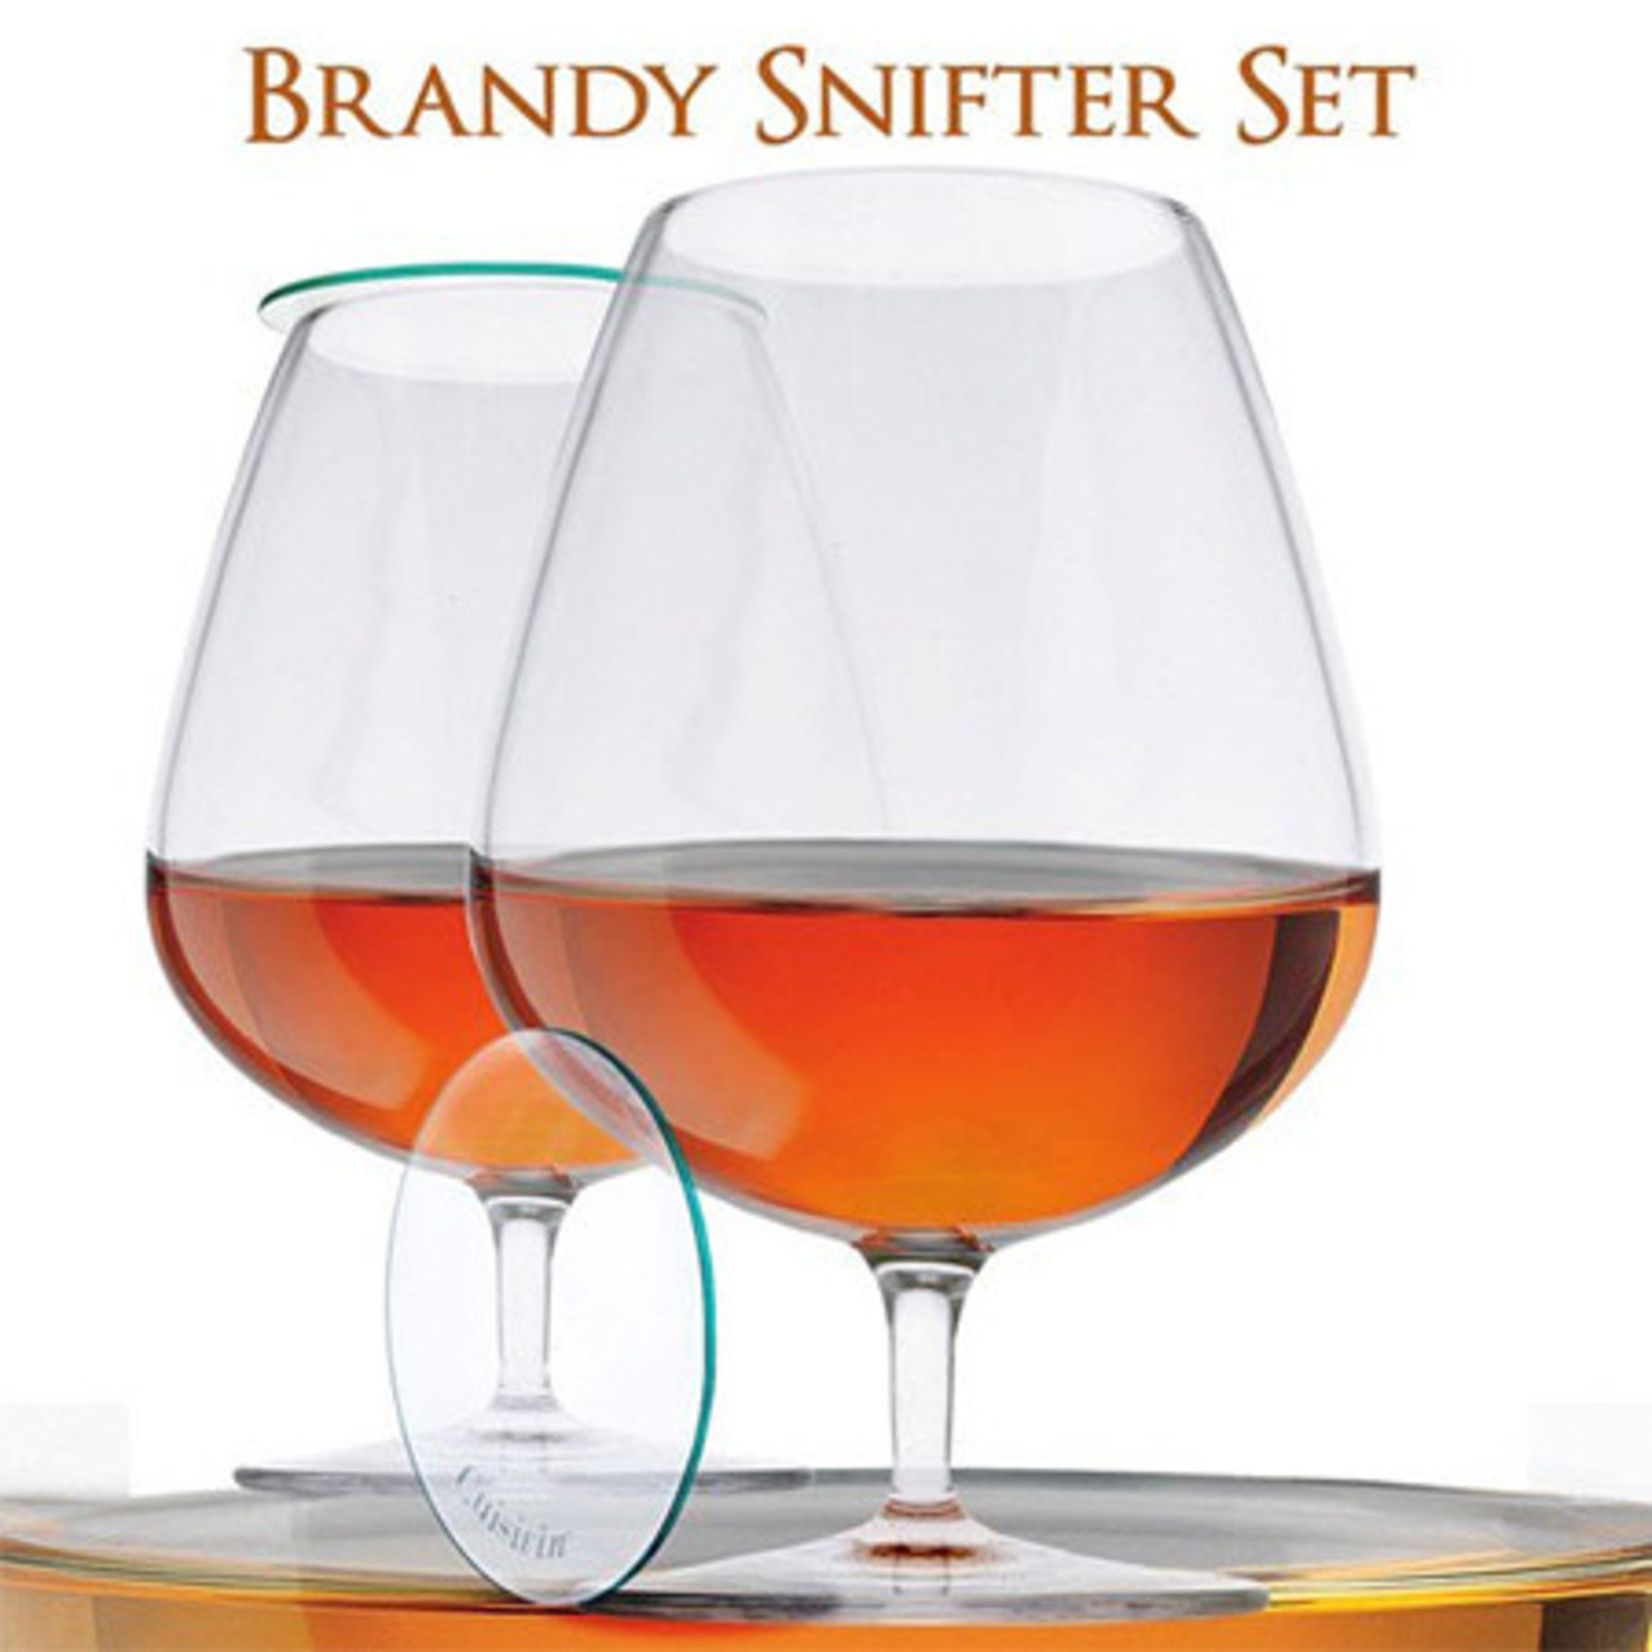 Glass- Brandy Snifter with Aroma Lid set of 2 in Tube